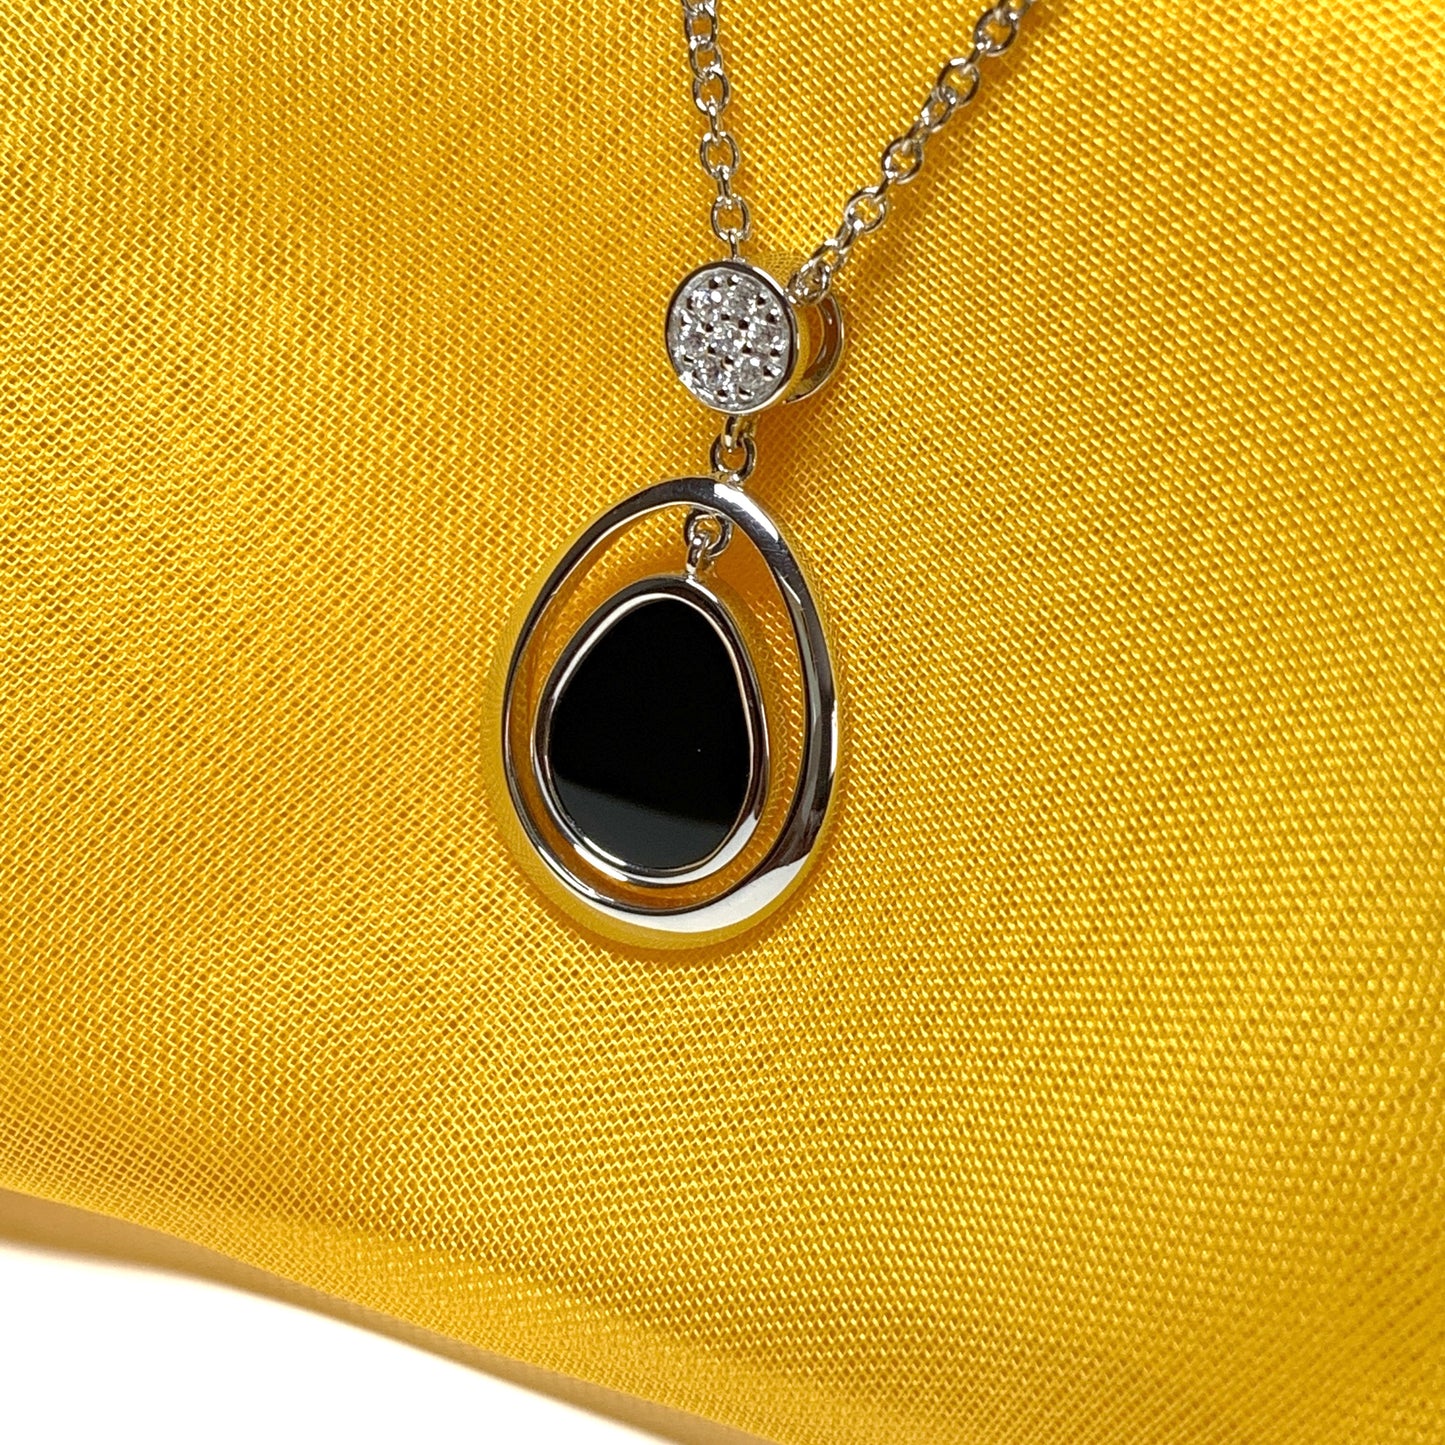 Double oval black onyx sterling silver necklace